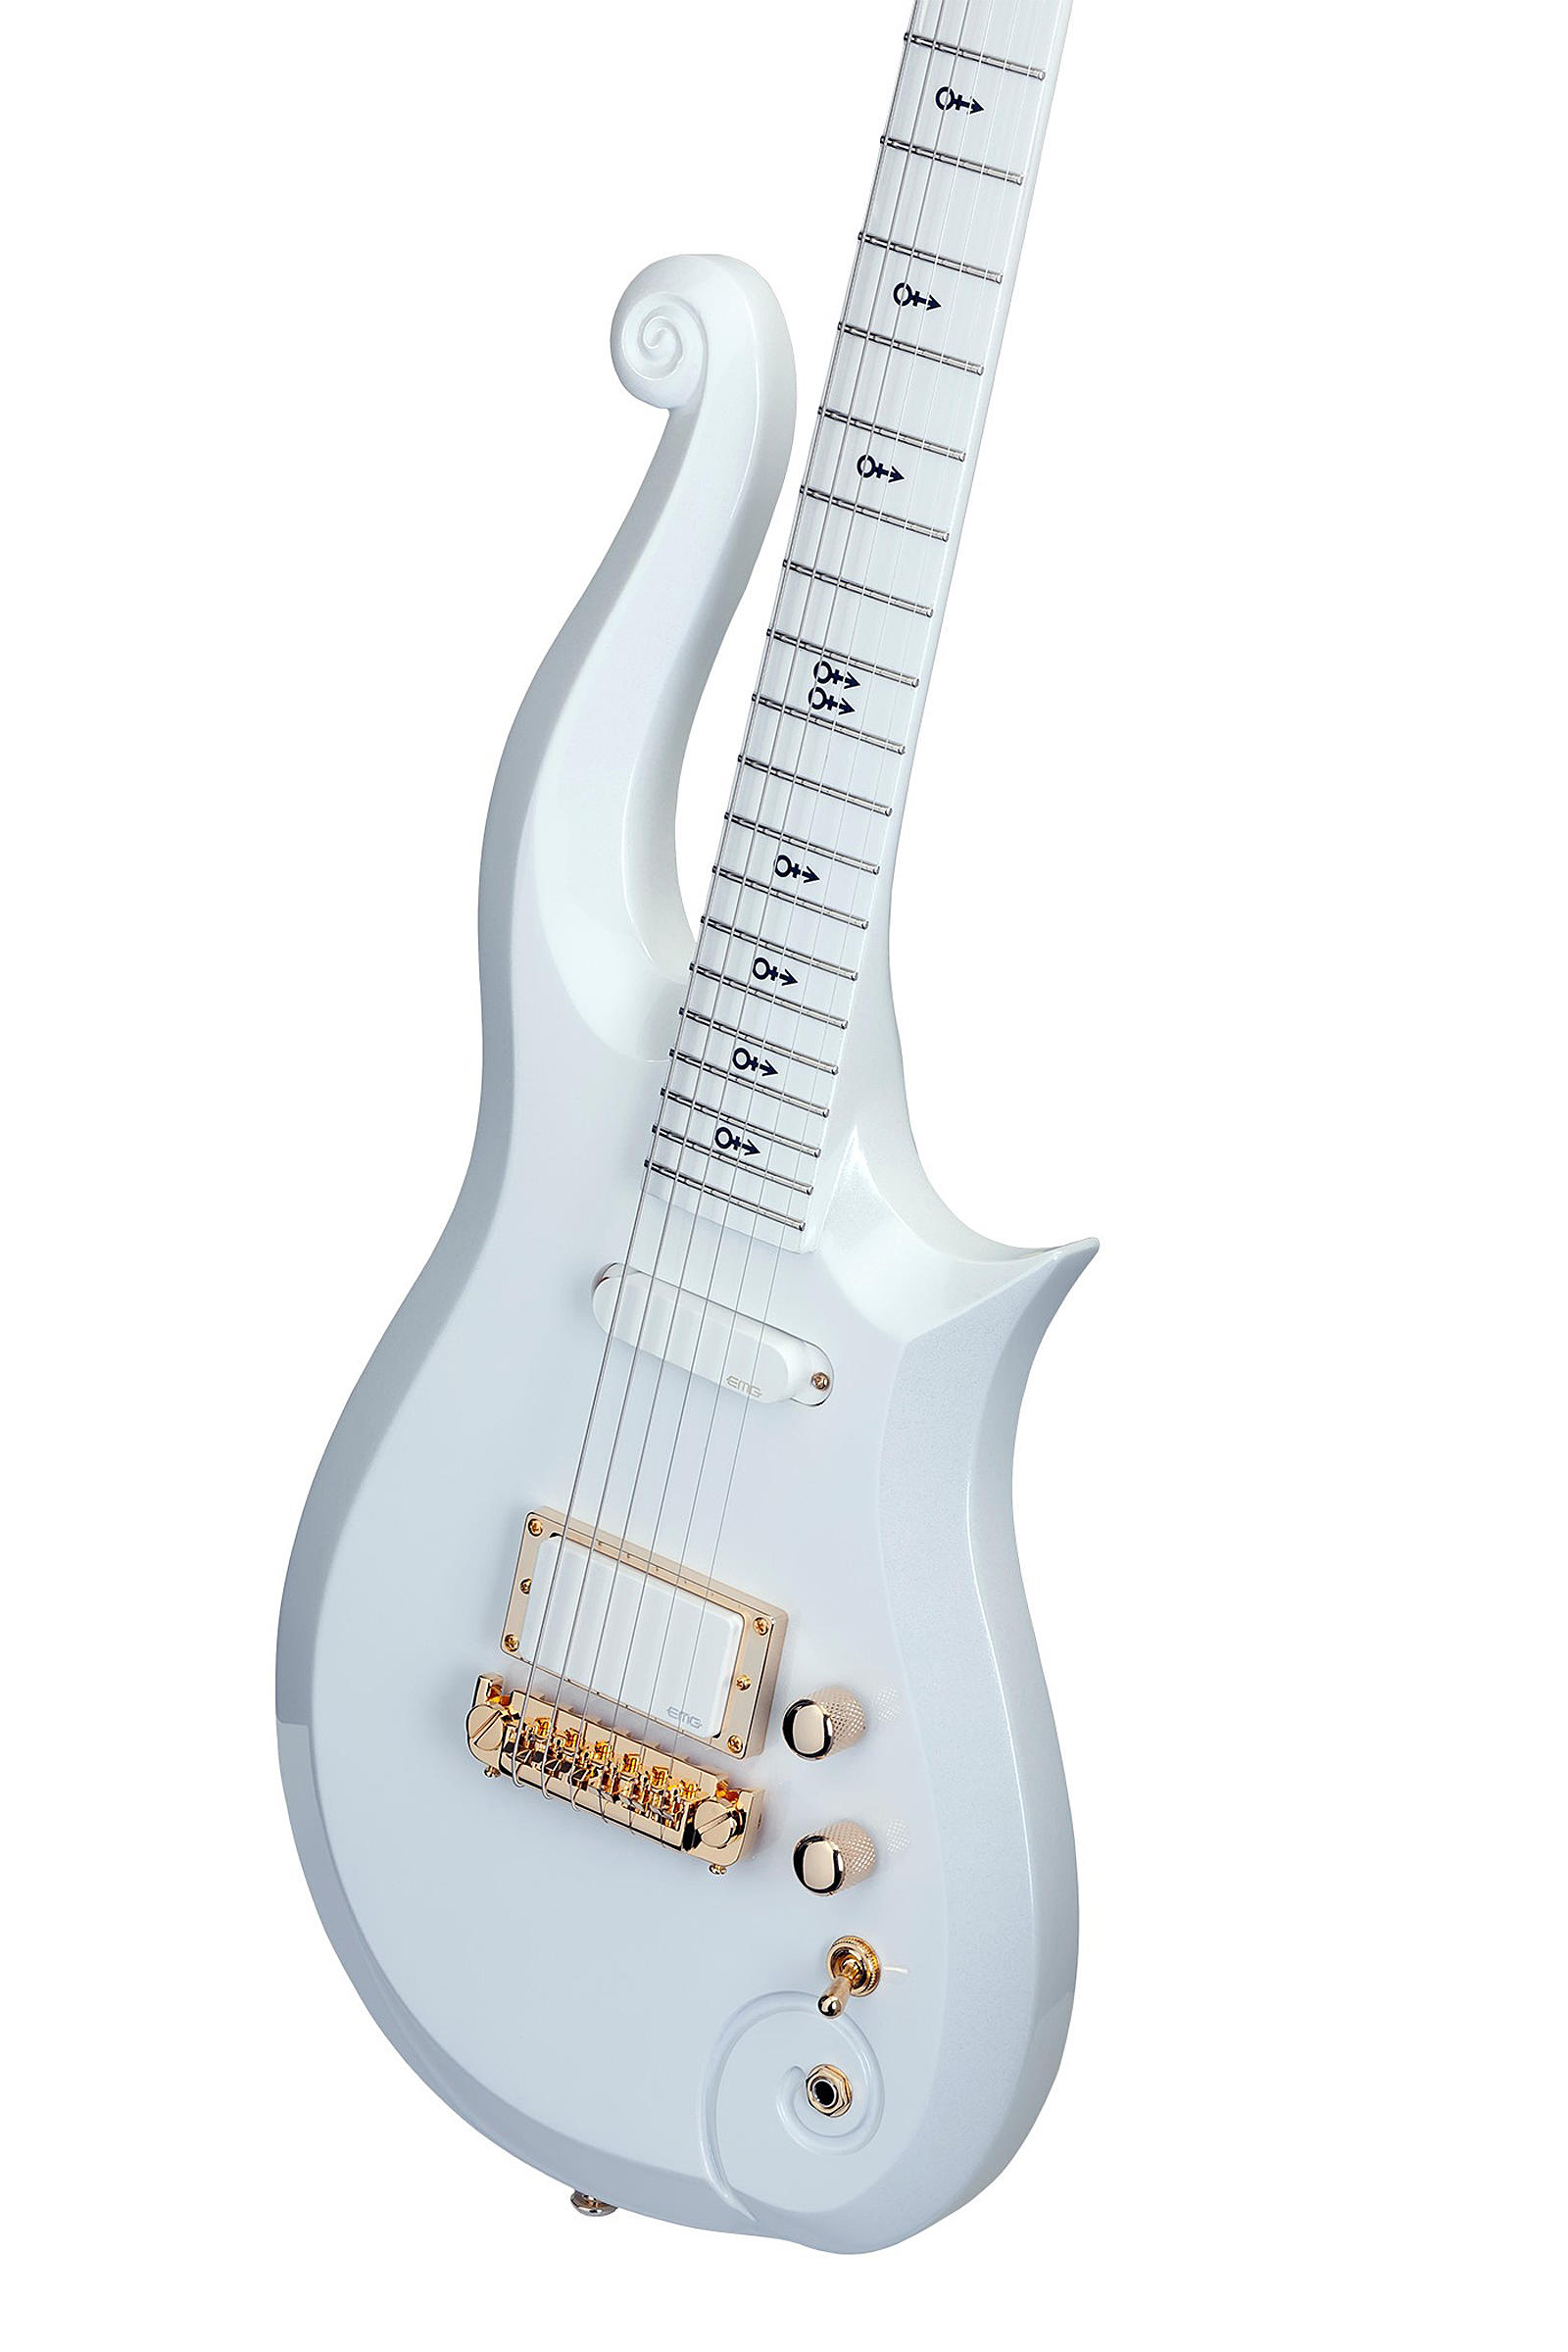 Prince's feminine White Cloud guitar, with the long upper cutaway. 